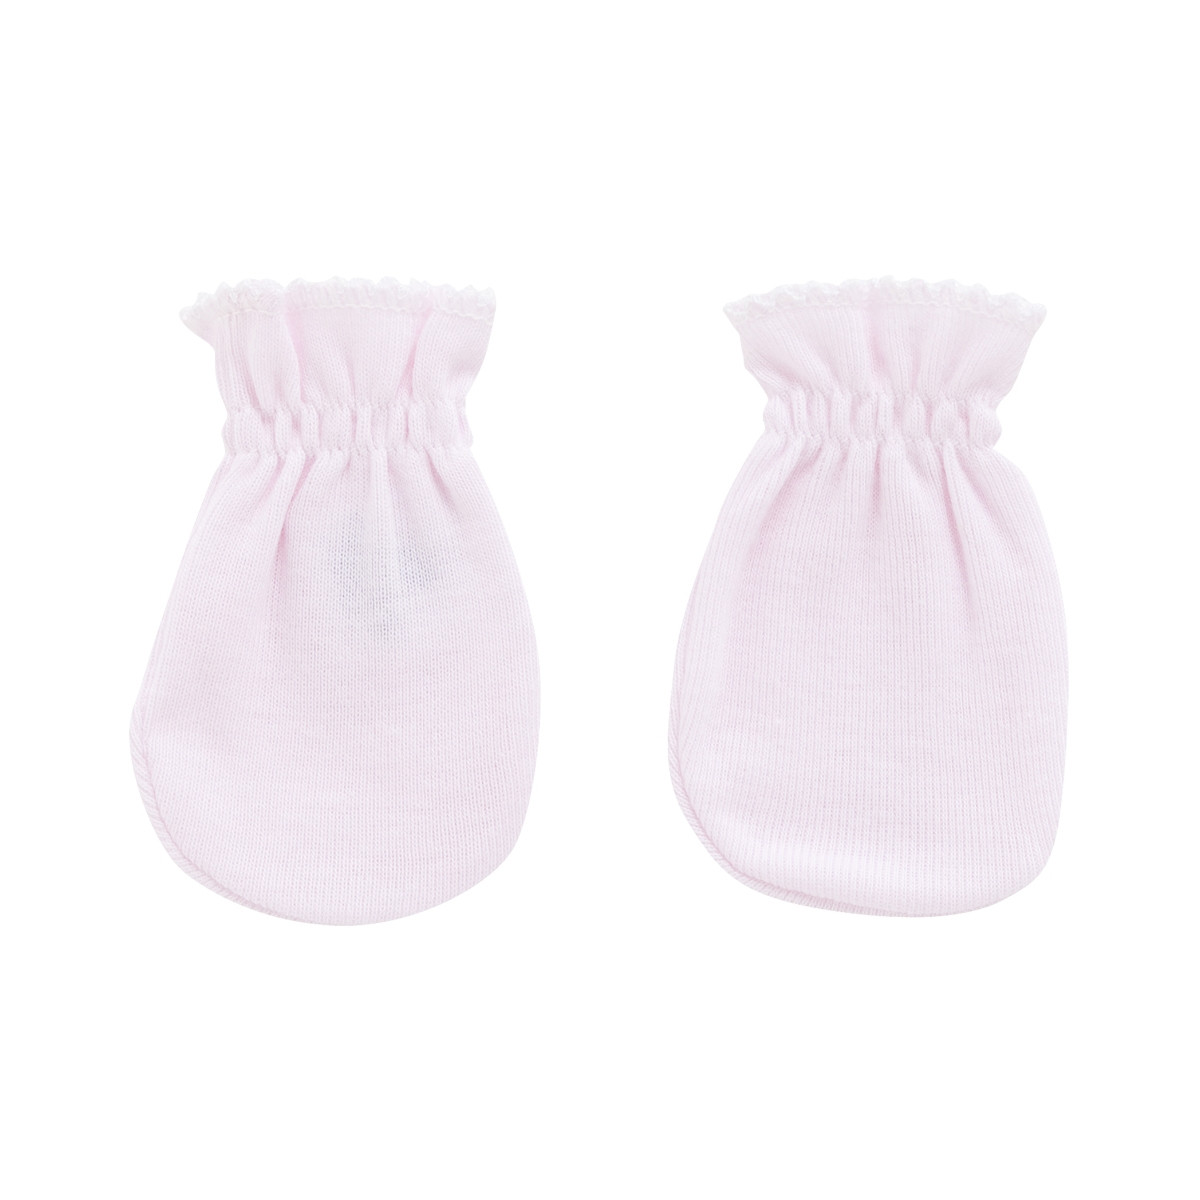 PAIR OF MITTENS LISO PINK CAMBRASS - 1